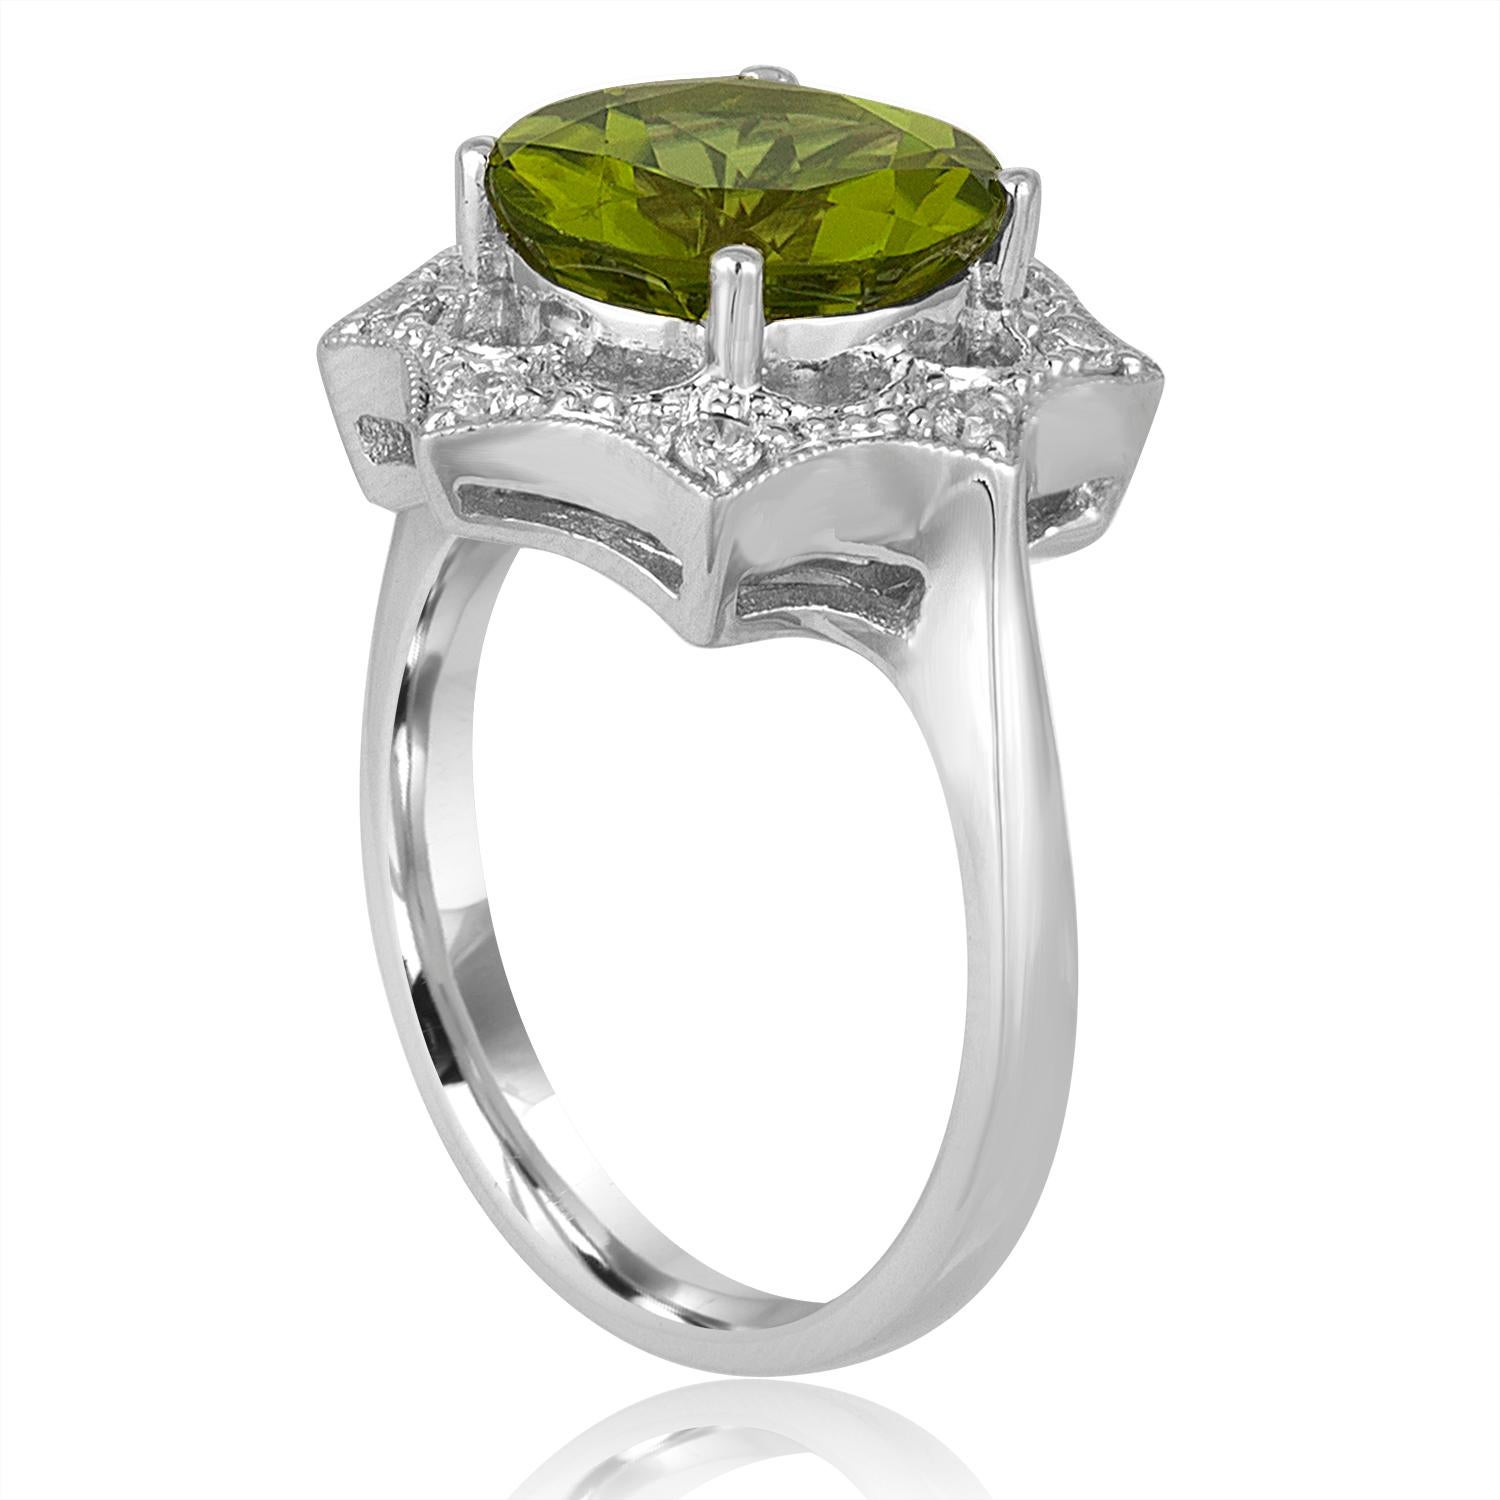 Beautiful Peridot & Diamond Ring.
The ring is 18K White Gold
The center stone is a Round Peridot 3.81 Carats
There is 0.17 Carats in Diamonds H SI
The top of the ring is 16.20mm in diameter.
The ring is a size 6.5, sizable
The ring weighs 6.2 grams